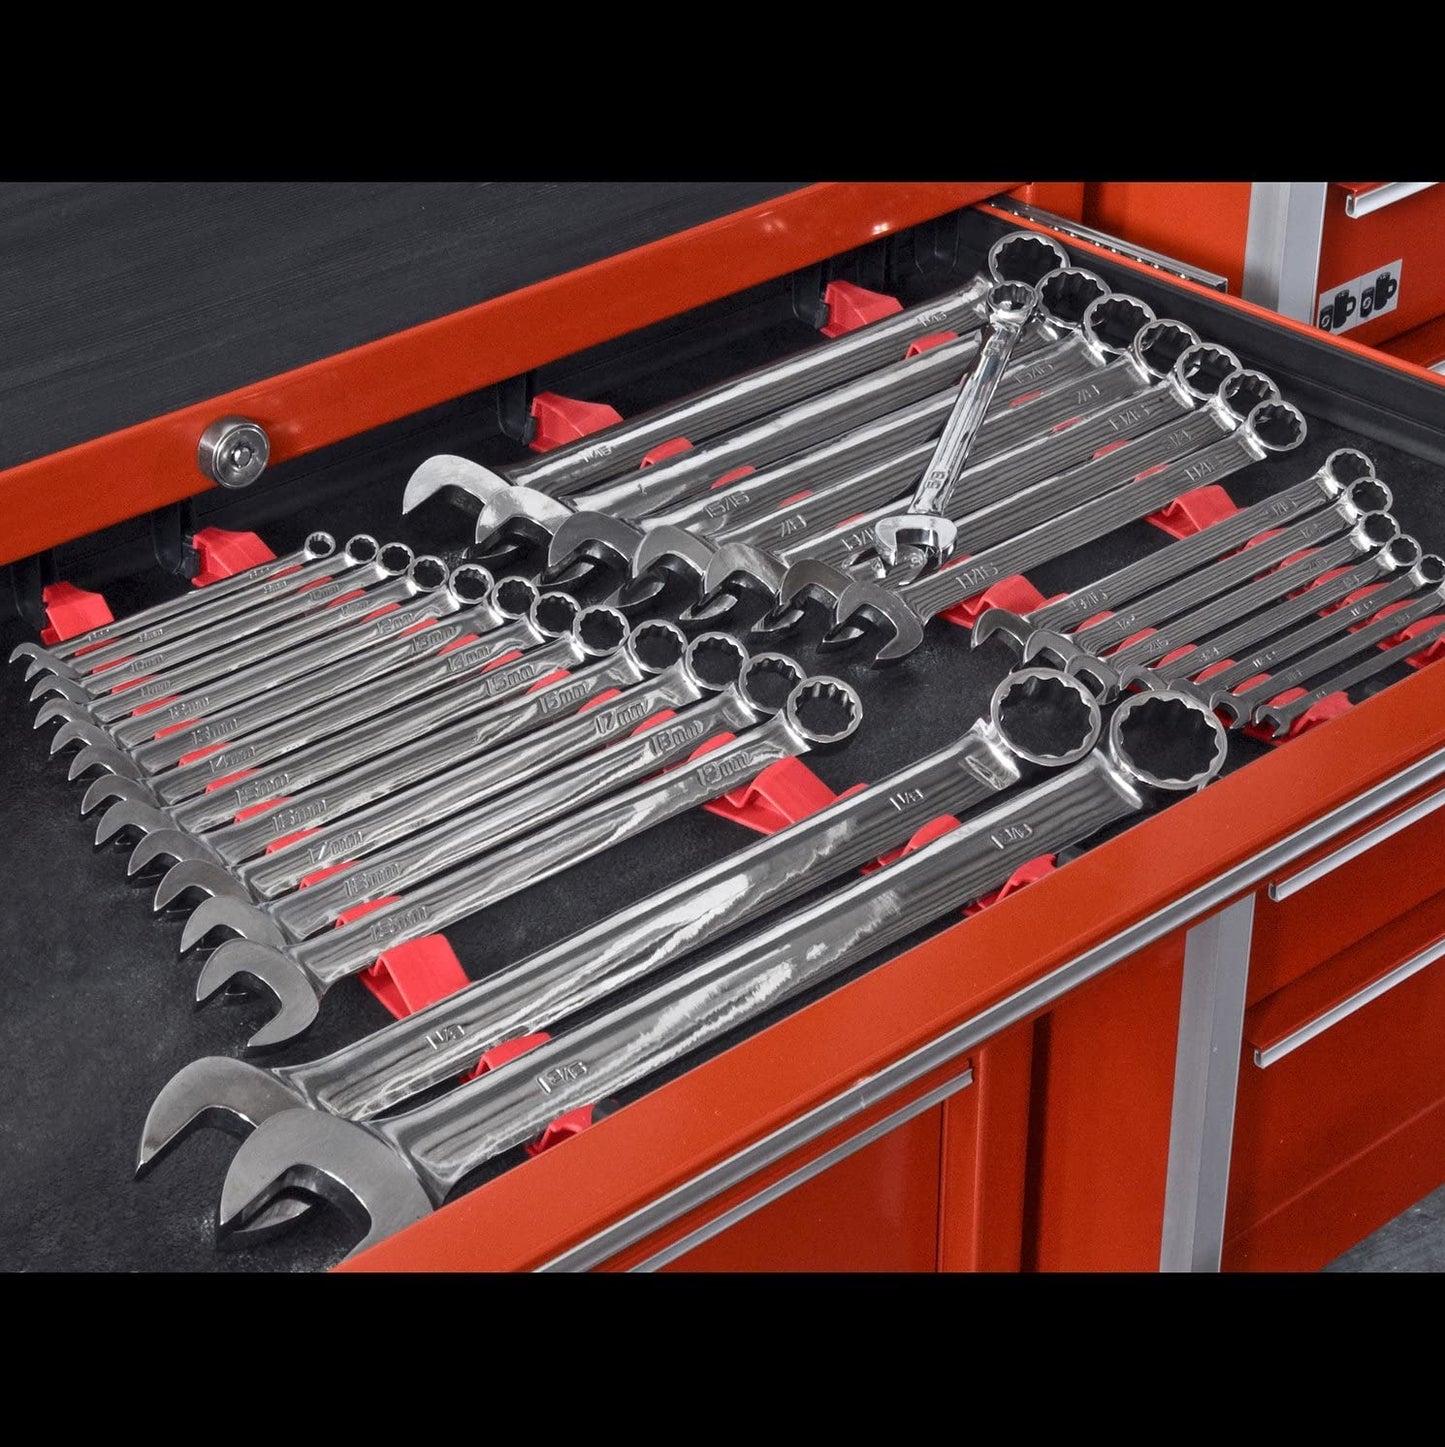 Low Profile Plastic 30 Tool Wrench Organizer Rail 4-Piece Set - Black or Red